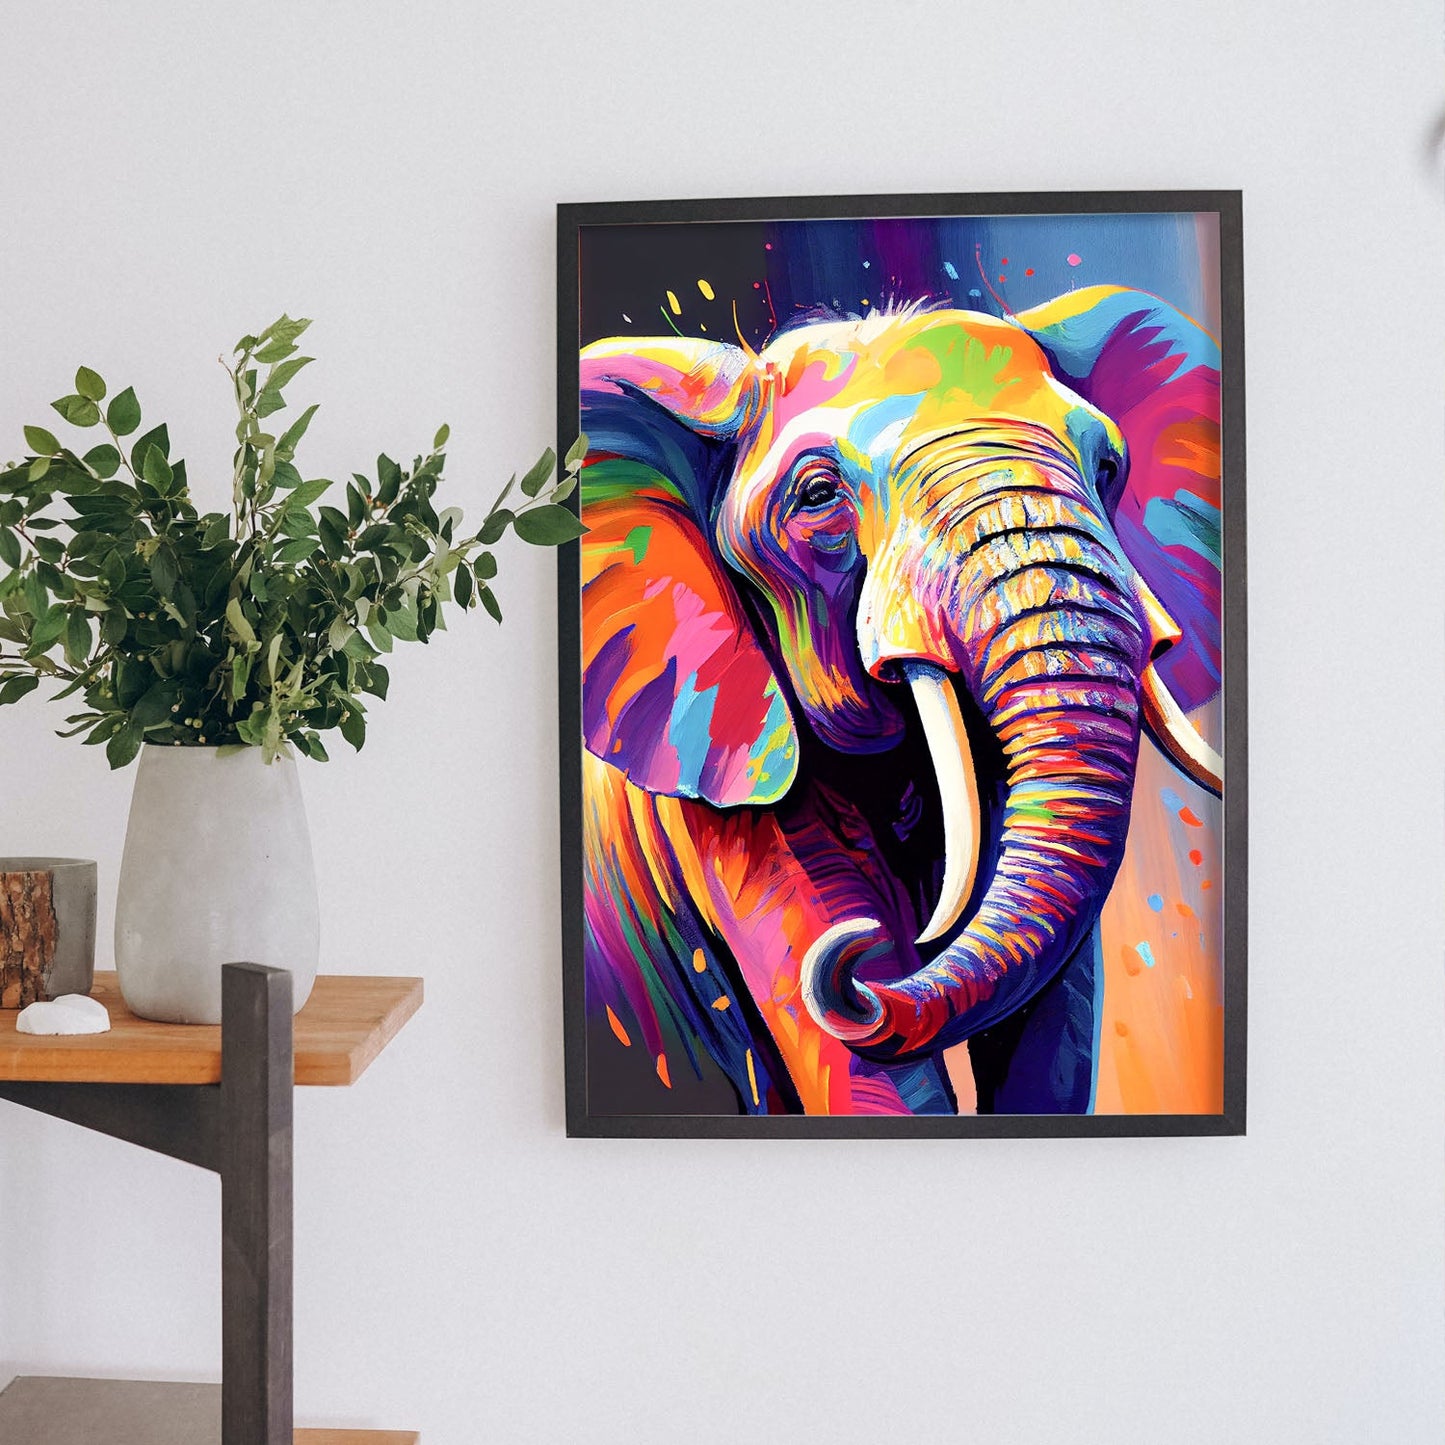 Nacnic Abstract smiling Elephant in Lisa Fran Style_1. Aesthetic Wall Art Prints for Bedroom or Living Room Design.